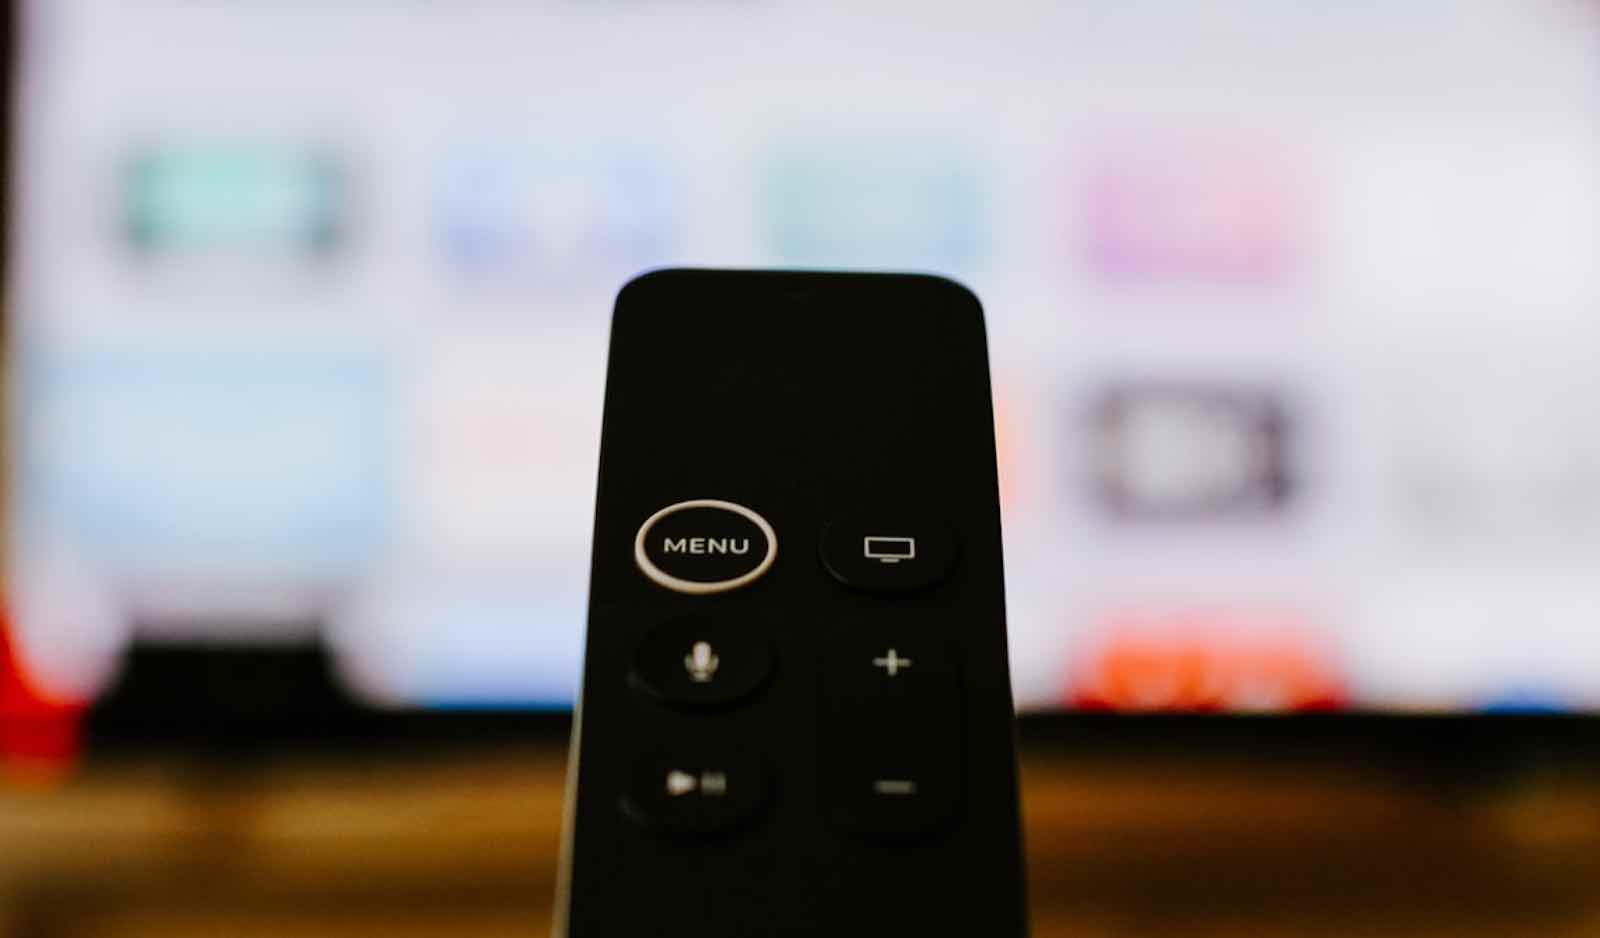 Streaming apps have become the new milestone in television as consumers become more attracted to cheaper subscriptions and personalized accounts.